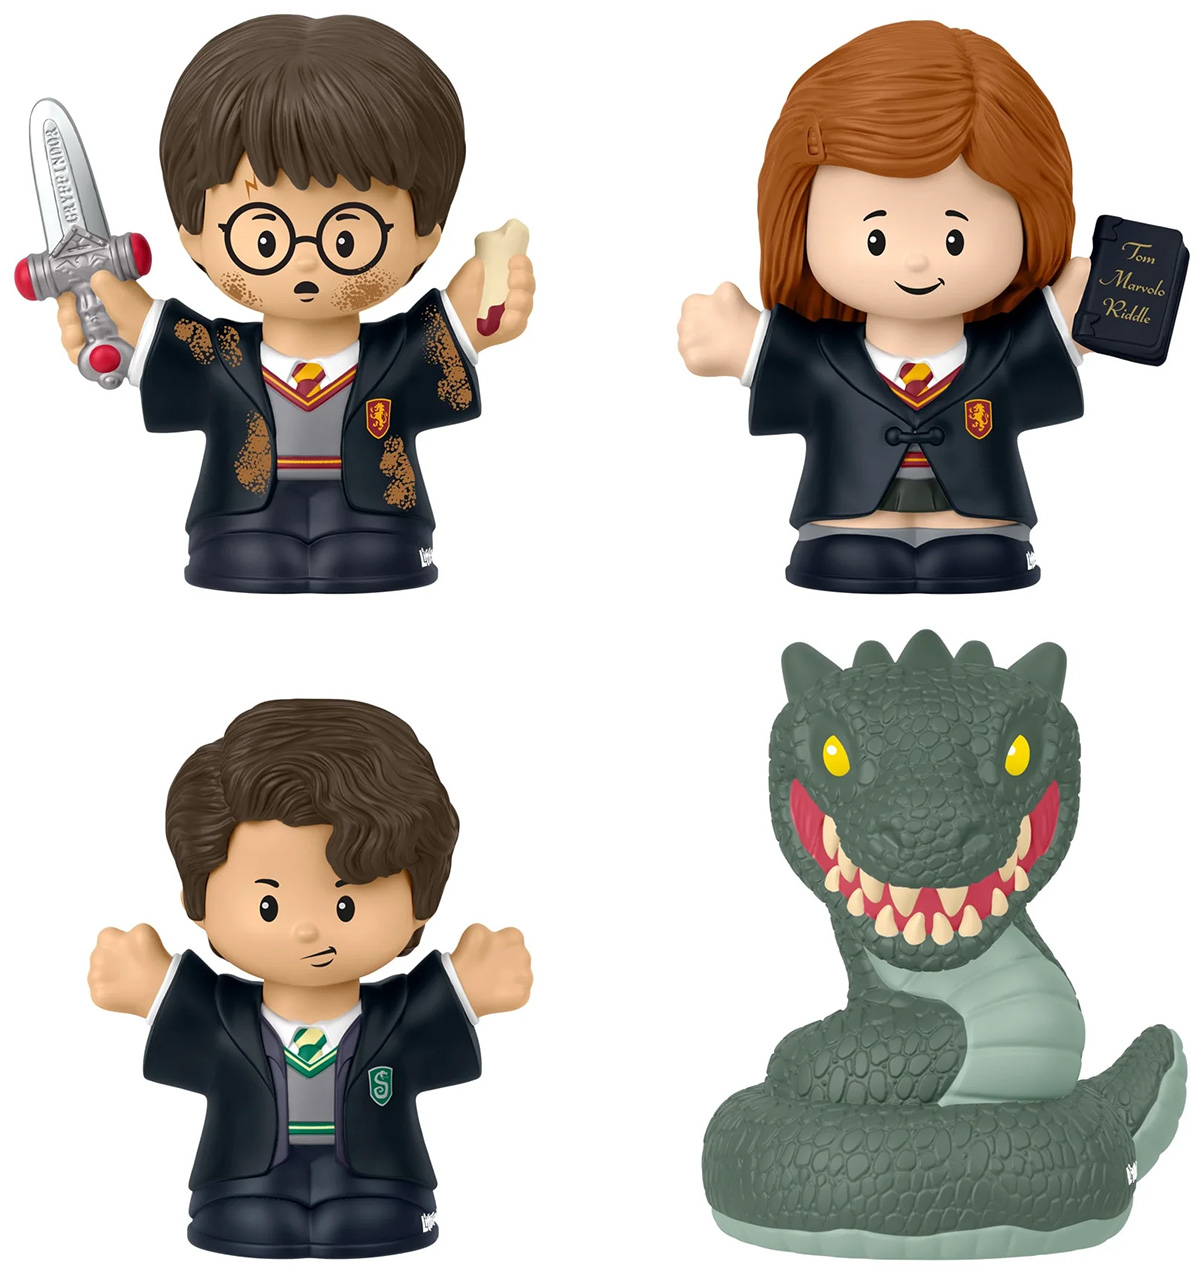 Little People Collector Harry Potter: Philosopher's Stone and the Chamber of Secrets dolls